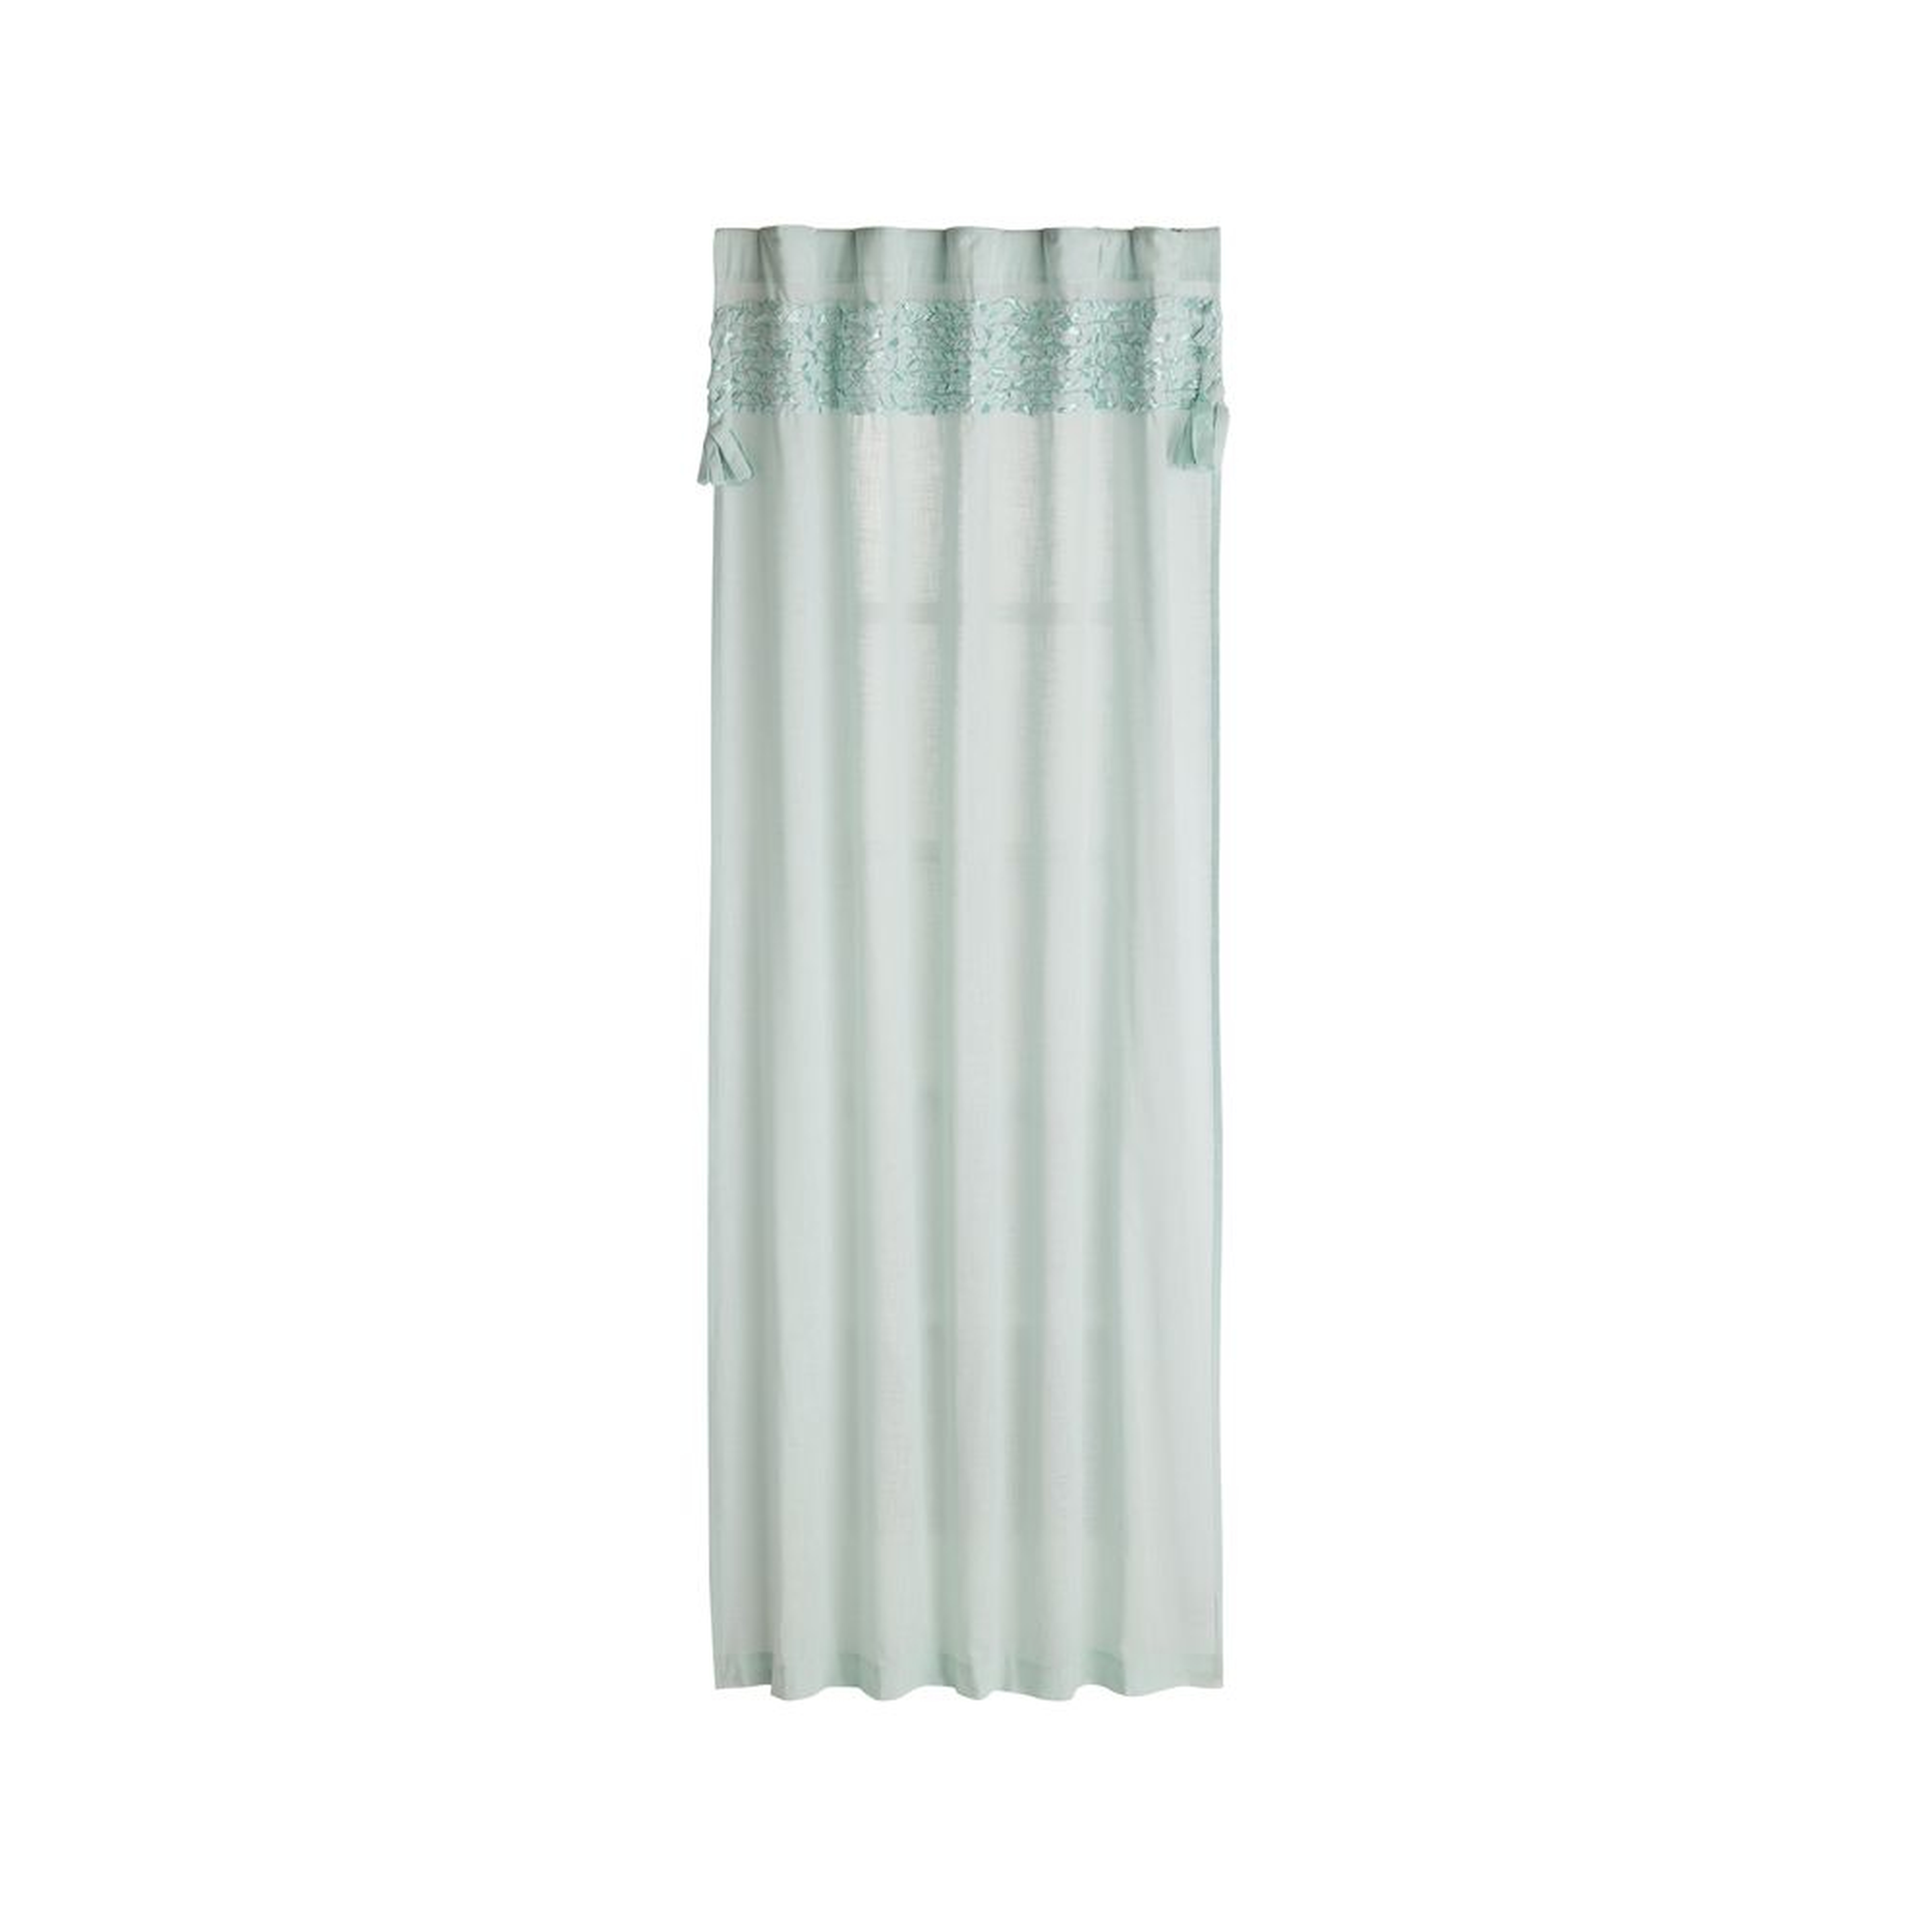 Fringe Mint 84" Curtain - Crate and Barrel